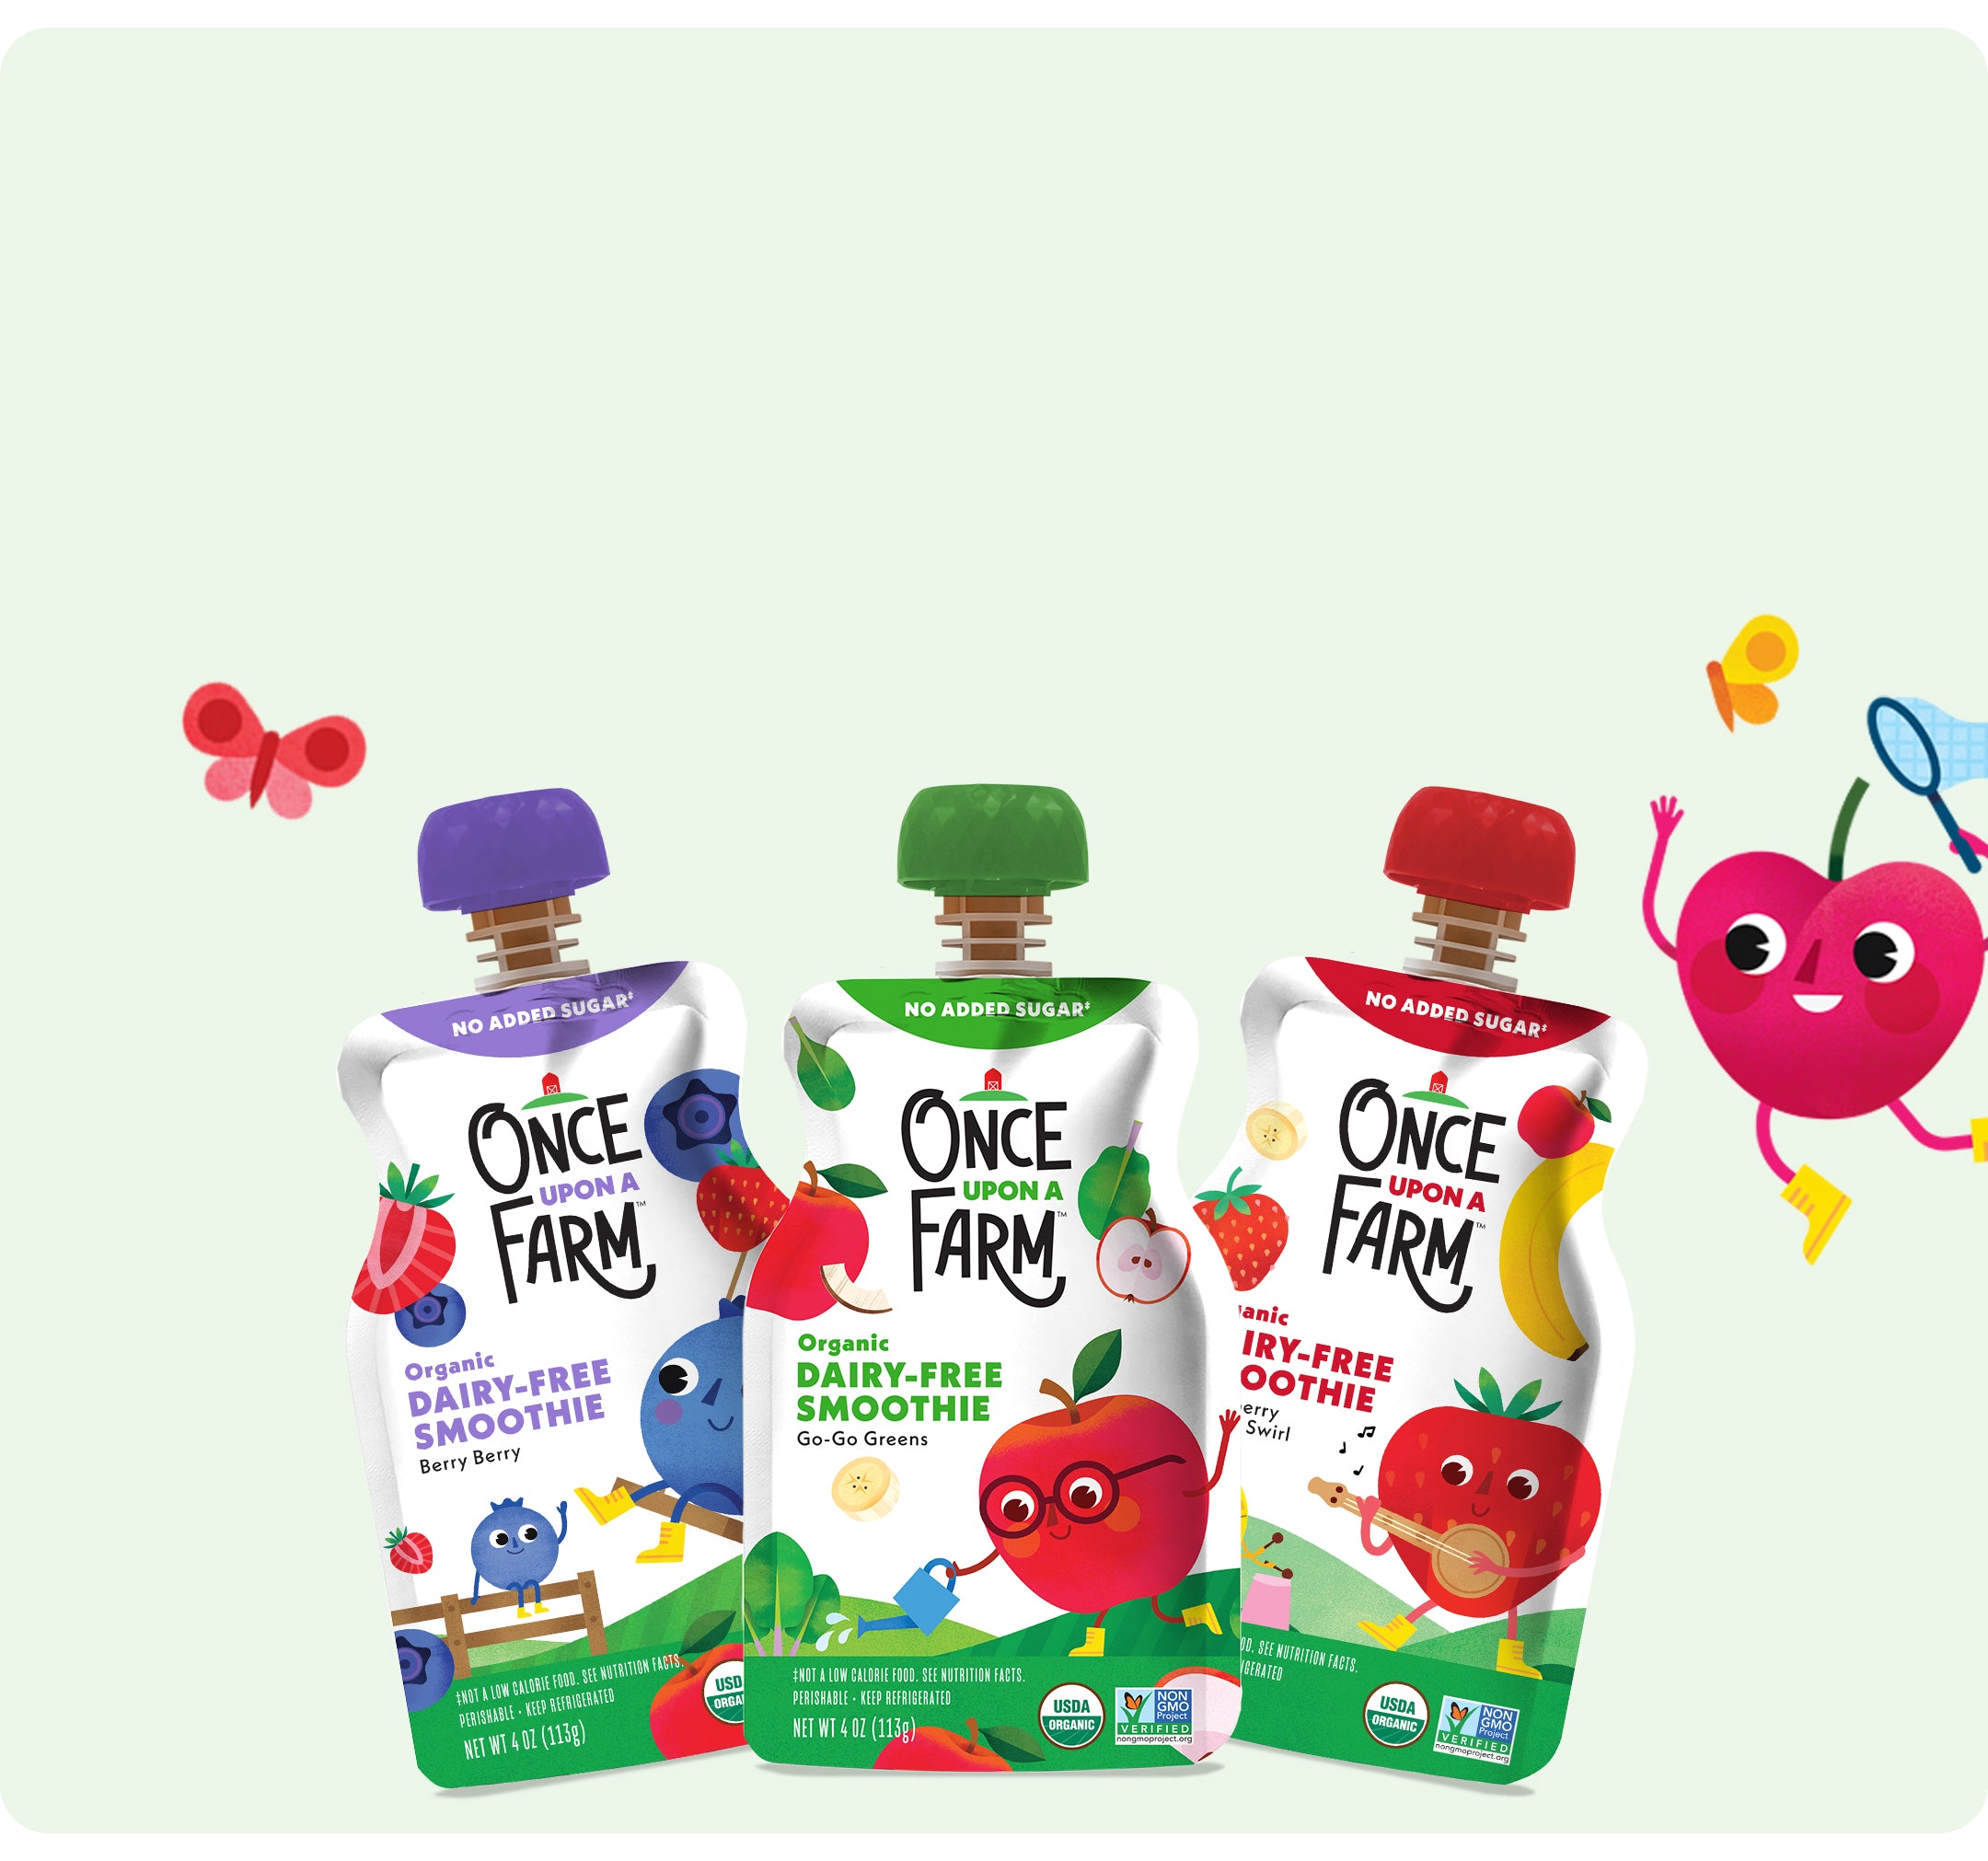 Once Upon a Farm Dairy-Free Smoothie Blends Illustration